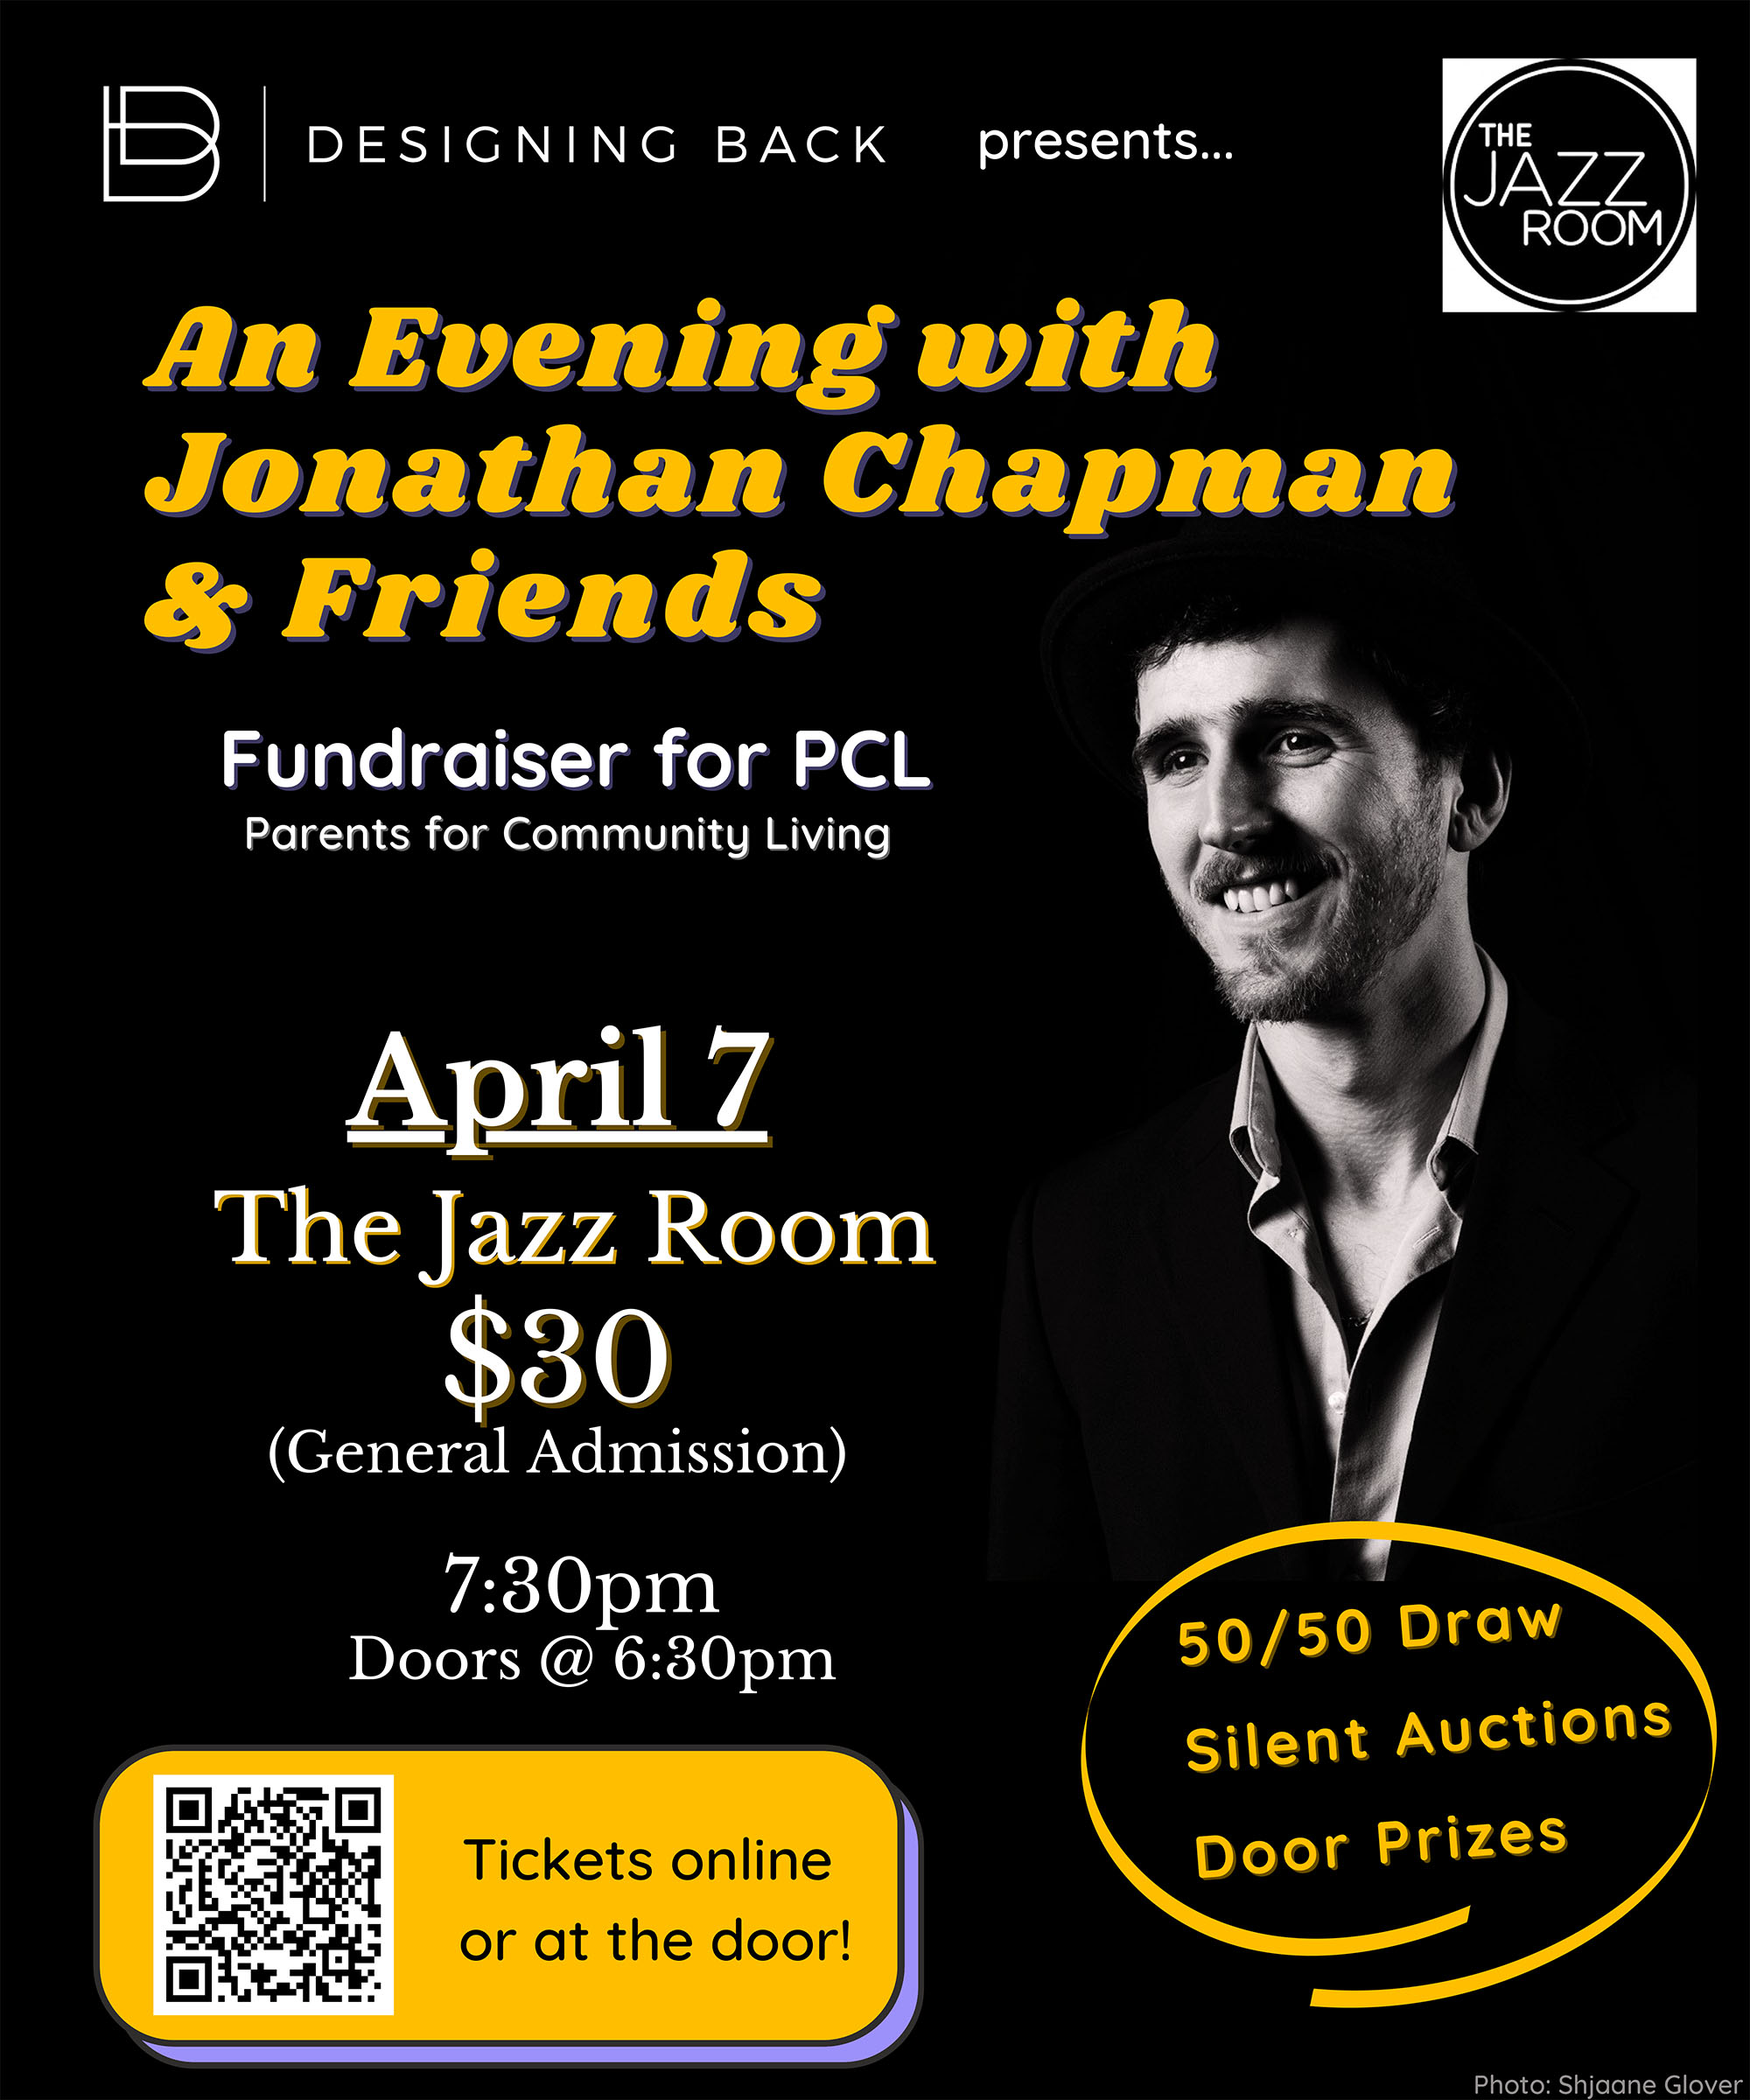 An Evening with Jonathan Chapman and Friends - April 7, 2022